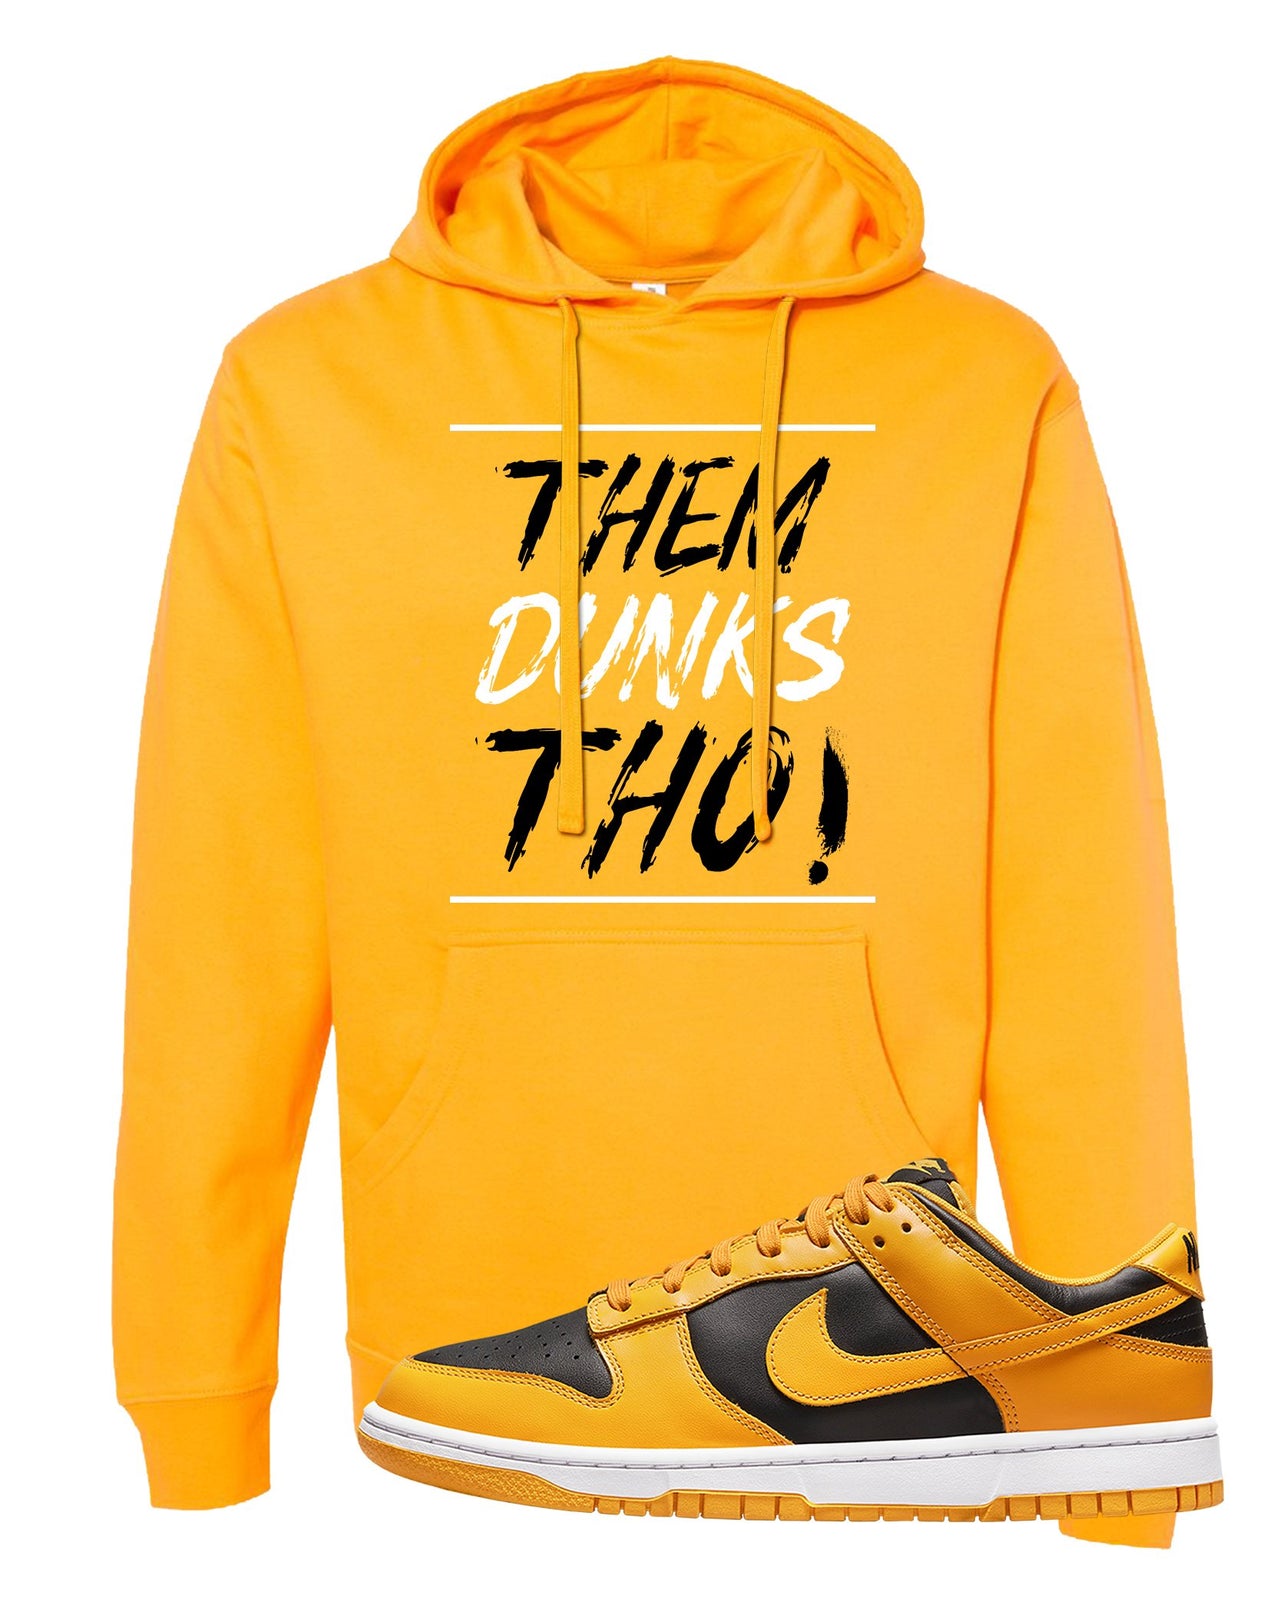 Goldenrod Low Dunks Hoodie | Them Dunks Tho, Gold